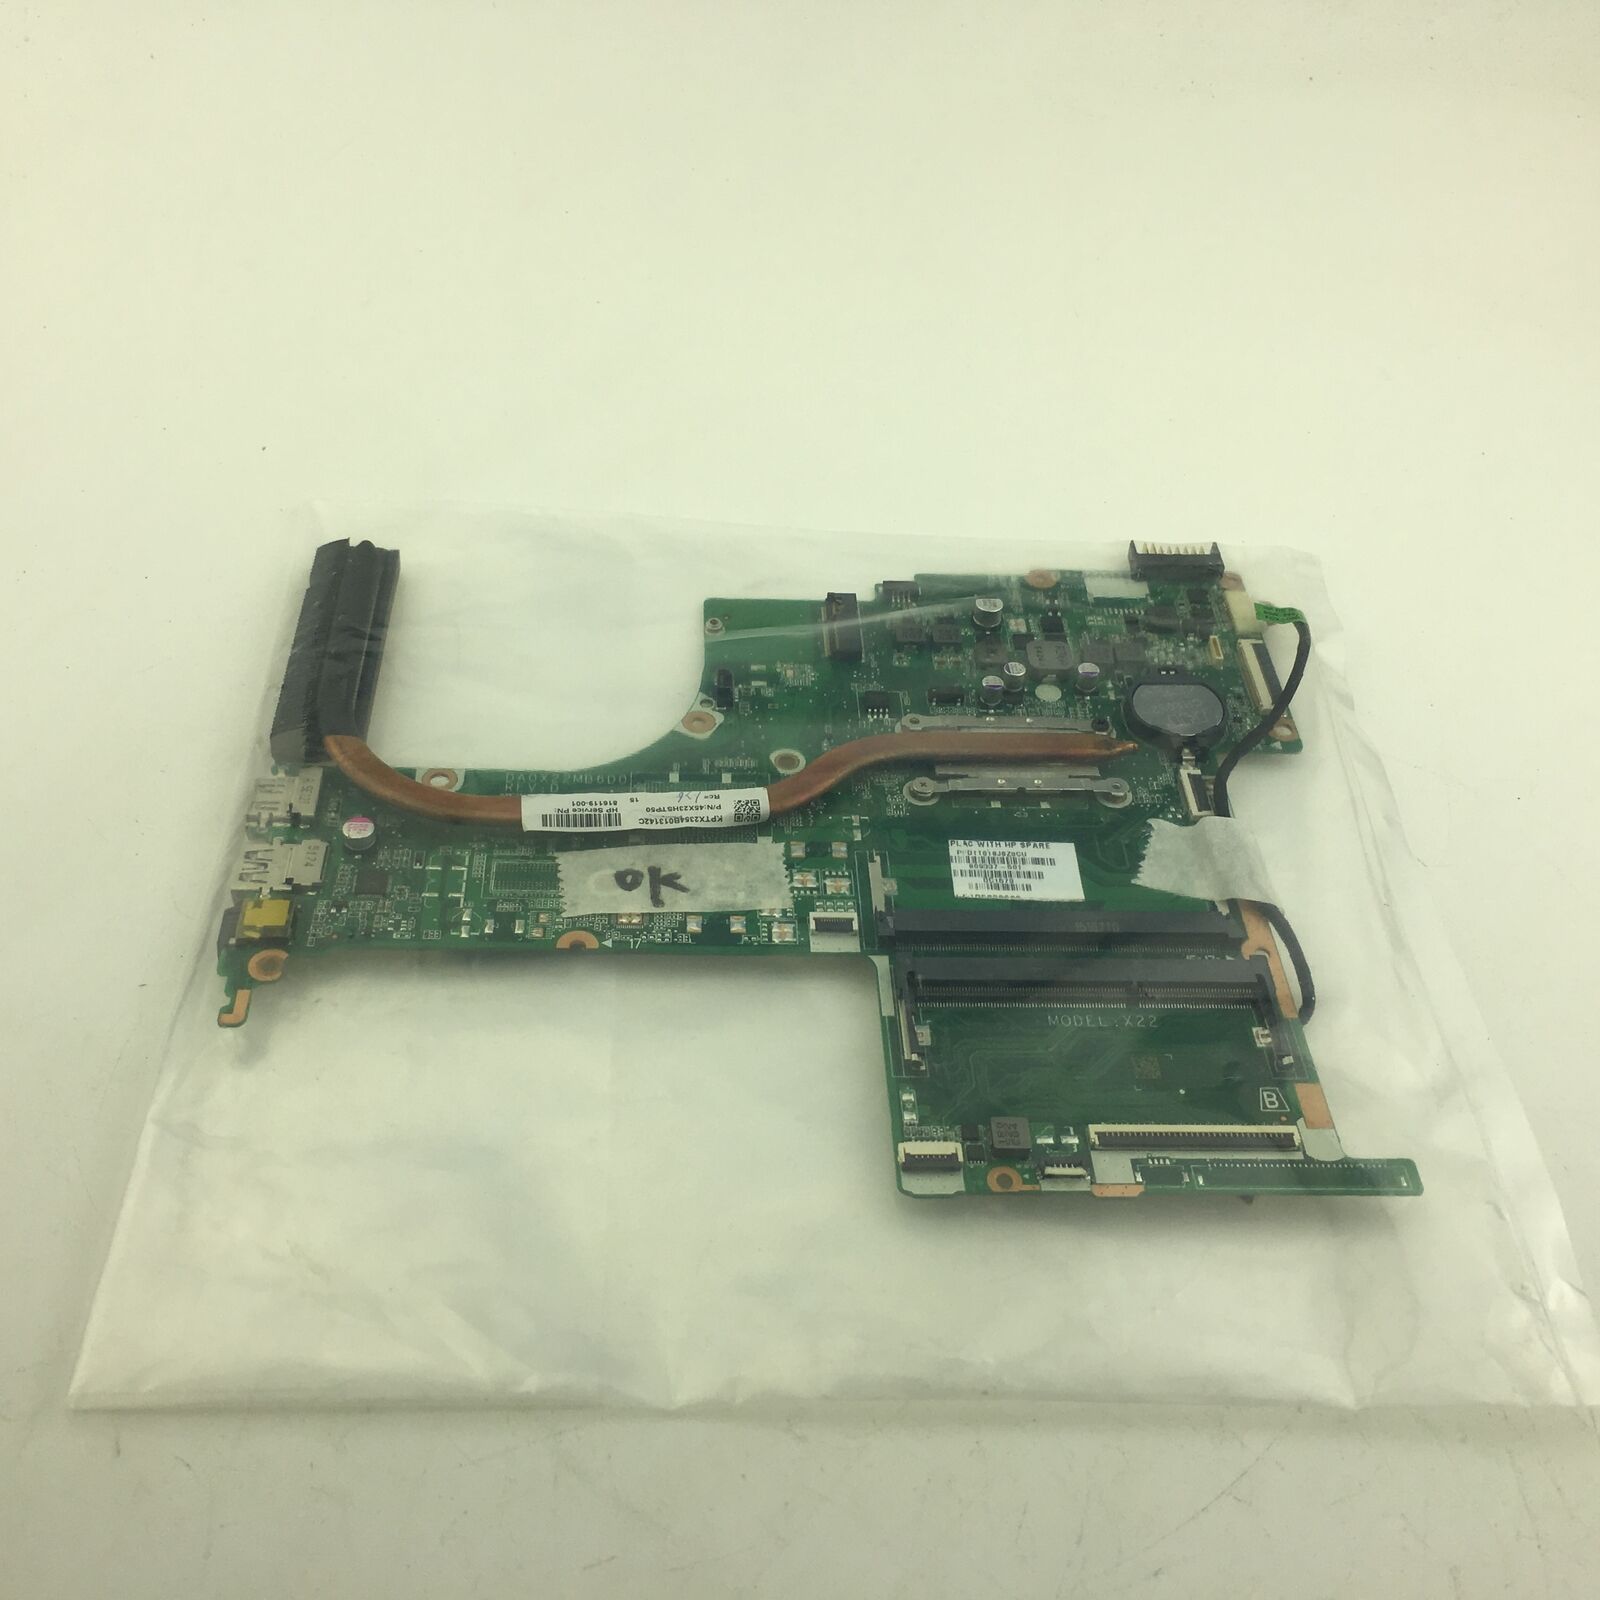 687939-001 Main Board HP Probook 4530s 4730s Laptop Motherboard System Board Brand: hp MPN: 687939-001 S - Click Image to Close